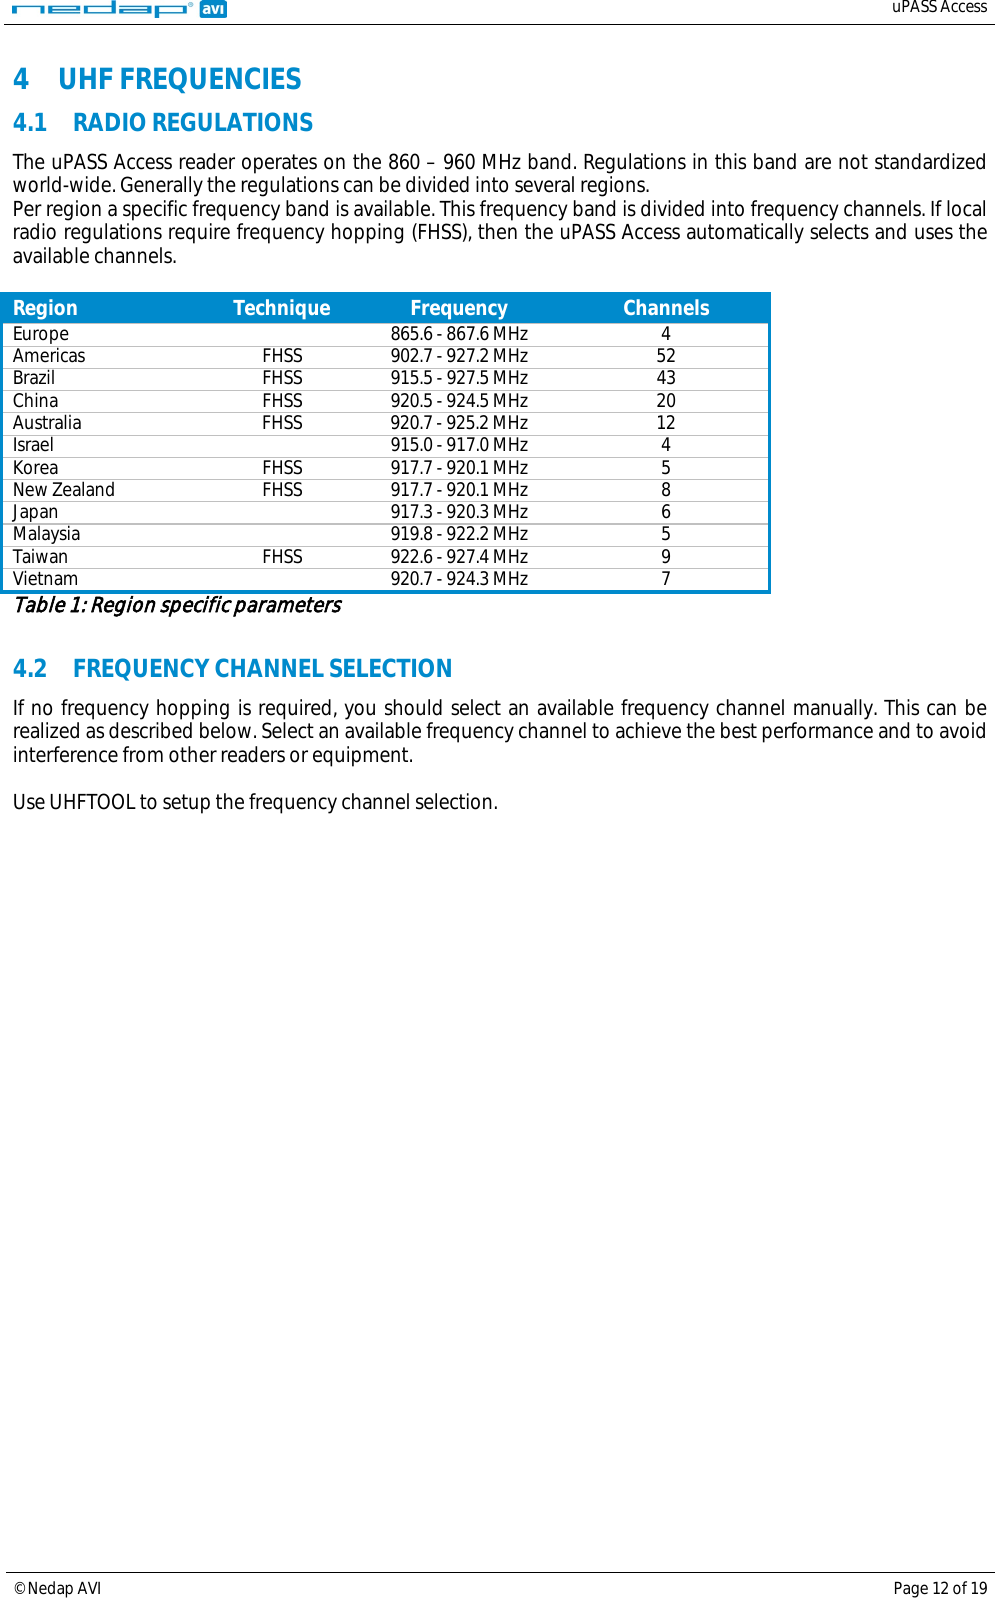   uPASS Access  © Nedap AVI Page 12 of 19  4 UHF FREQUENCIES 4.1 RADIO REGULATIONS The uPASS Access reader operates on the 860 – 960 MHz band. Regulations in this band are not standardized world-wide. Generally the regulations can be divided into several regions. Per region a specific frequency band is available. This frequency band is divided into frequency channels. If local radio regulations require frequency hopping (FHSS), then the uPASS Access automatically selects and uses the available channels.  Region Technique Frequency Channels Europe    865.6 - 867.6 MHz  4 Americas  FHSS  902.7 - 927.2 MHz 52 Brazil FHSS 915.5 - 927.5 MHz 43 China  FHSS  920.5 - 924.5 MHz 20 Australia  FHSS  920.7 - 925.2 MHz 12 Israel    915.0 - 917.0 MHz  4 Korea  FHSS  917.7 - 920.1 MHz  5 New Zealand  FHSS  917.7 - 920.1 MHz  8 Japan    917.3 - 920.3 MHz  6 Malaysia    919.8 - 922.2 MHz  5 Taiwan  FHSS  922.6 - 927.4 MHz  9 Vietnam    920.7 - 924.3 MHz  7 Table 1: Region specific parameters  4.2 FREQUENCY CHANNEL SELECTION If no frequency hopping is required, you should select an available frequency channel manually. This can be realized as described below. Select an available frequency channel to achieve the best performance and to avoid interference from other readers or equipment.  Use UHFTOOL to setup the frequency channel selection.     